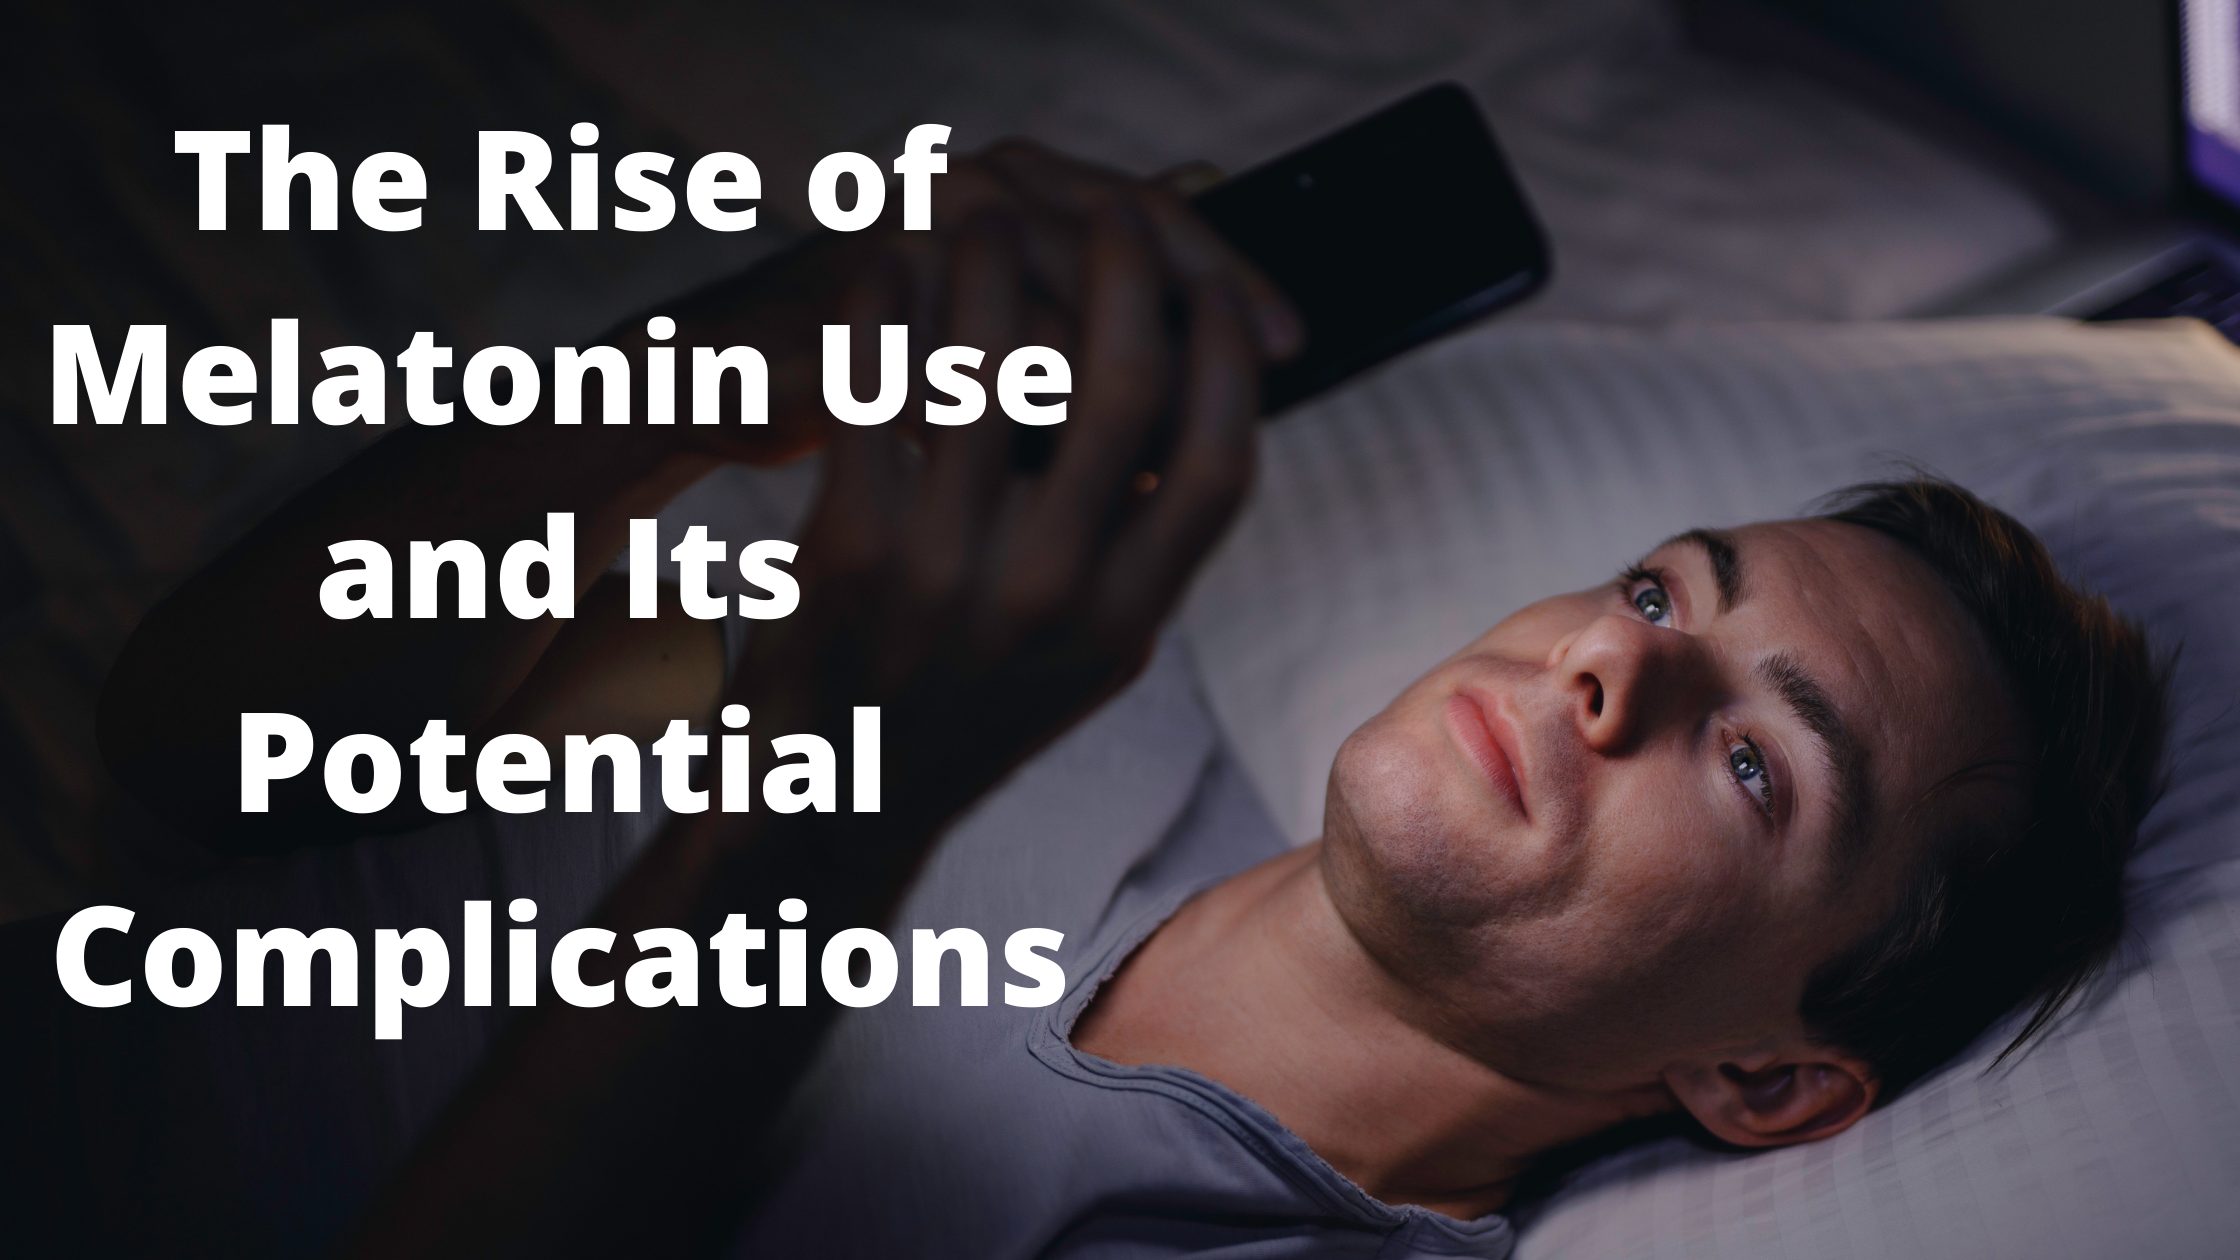 The Rise of Melatonin Use and Its Potential Complications